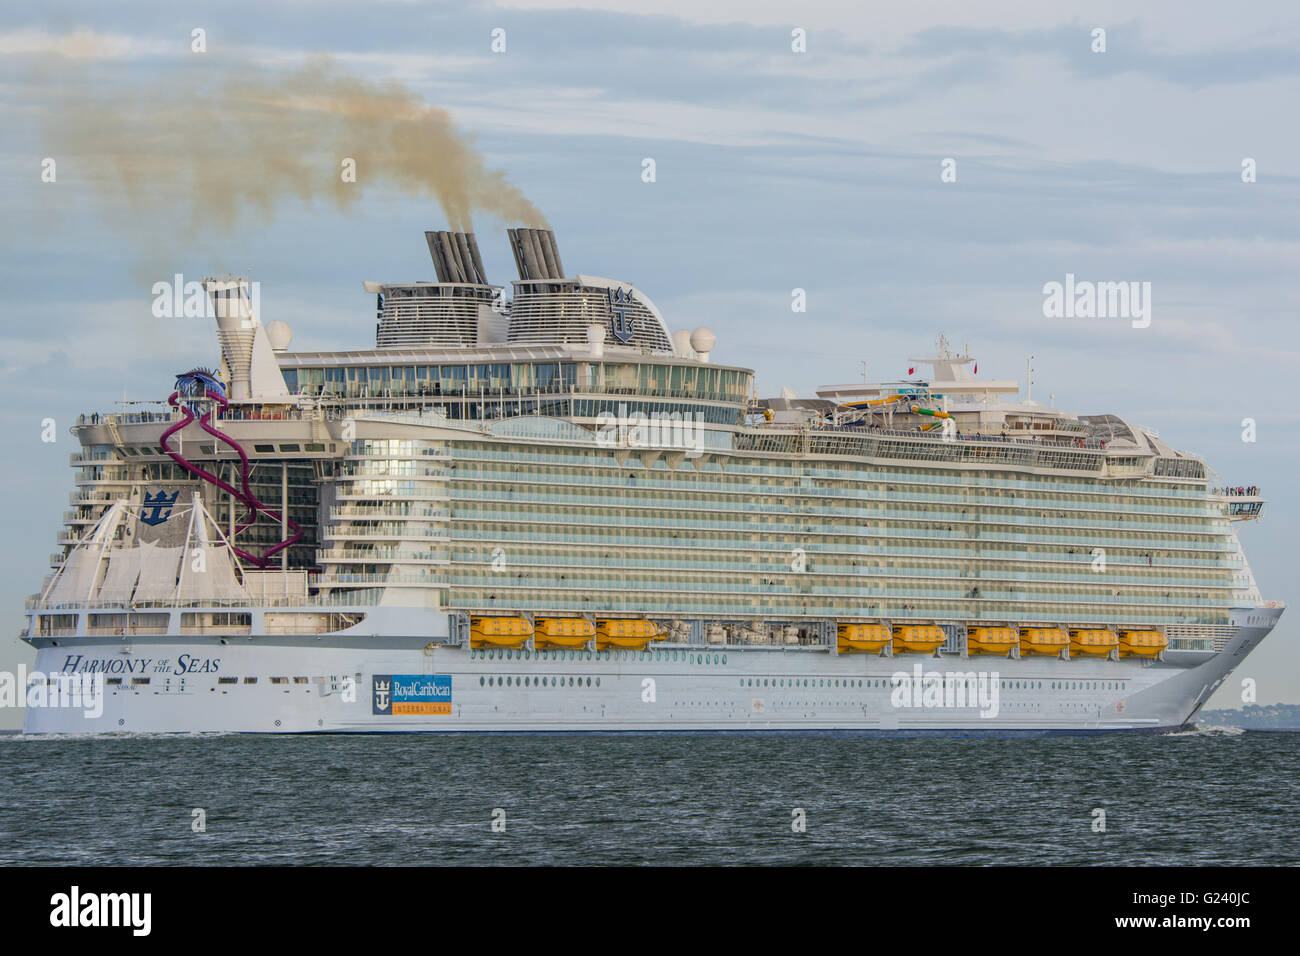 The cruise ship Harmony of the Seas departing Southampton, UK on the 22nd May 2016 for it's maiden cruise. Stock Photo